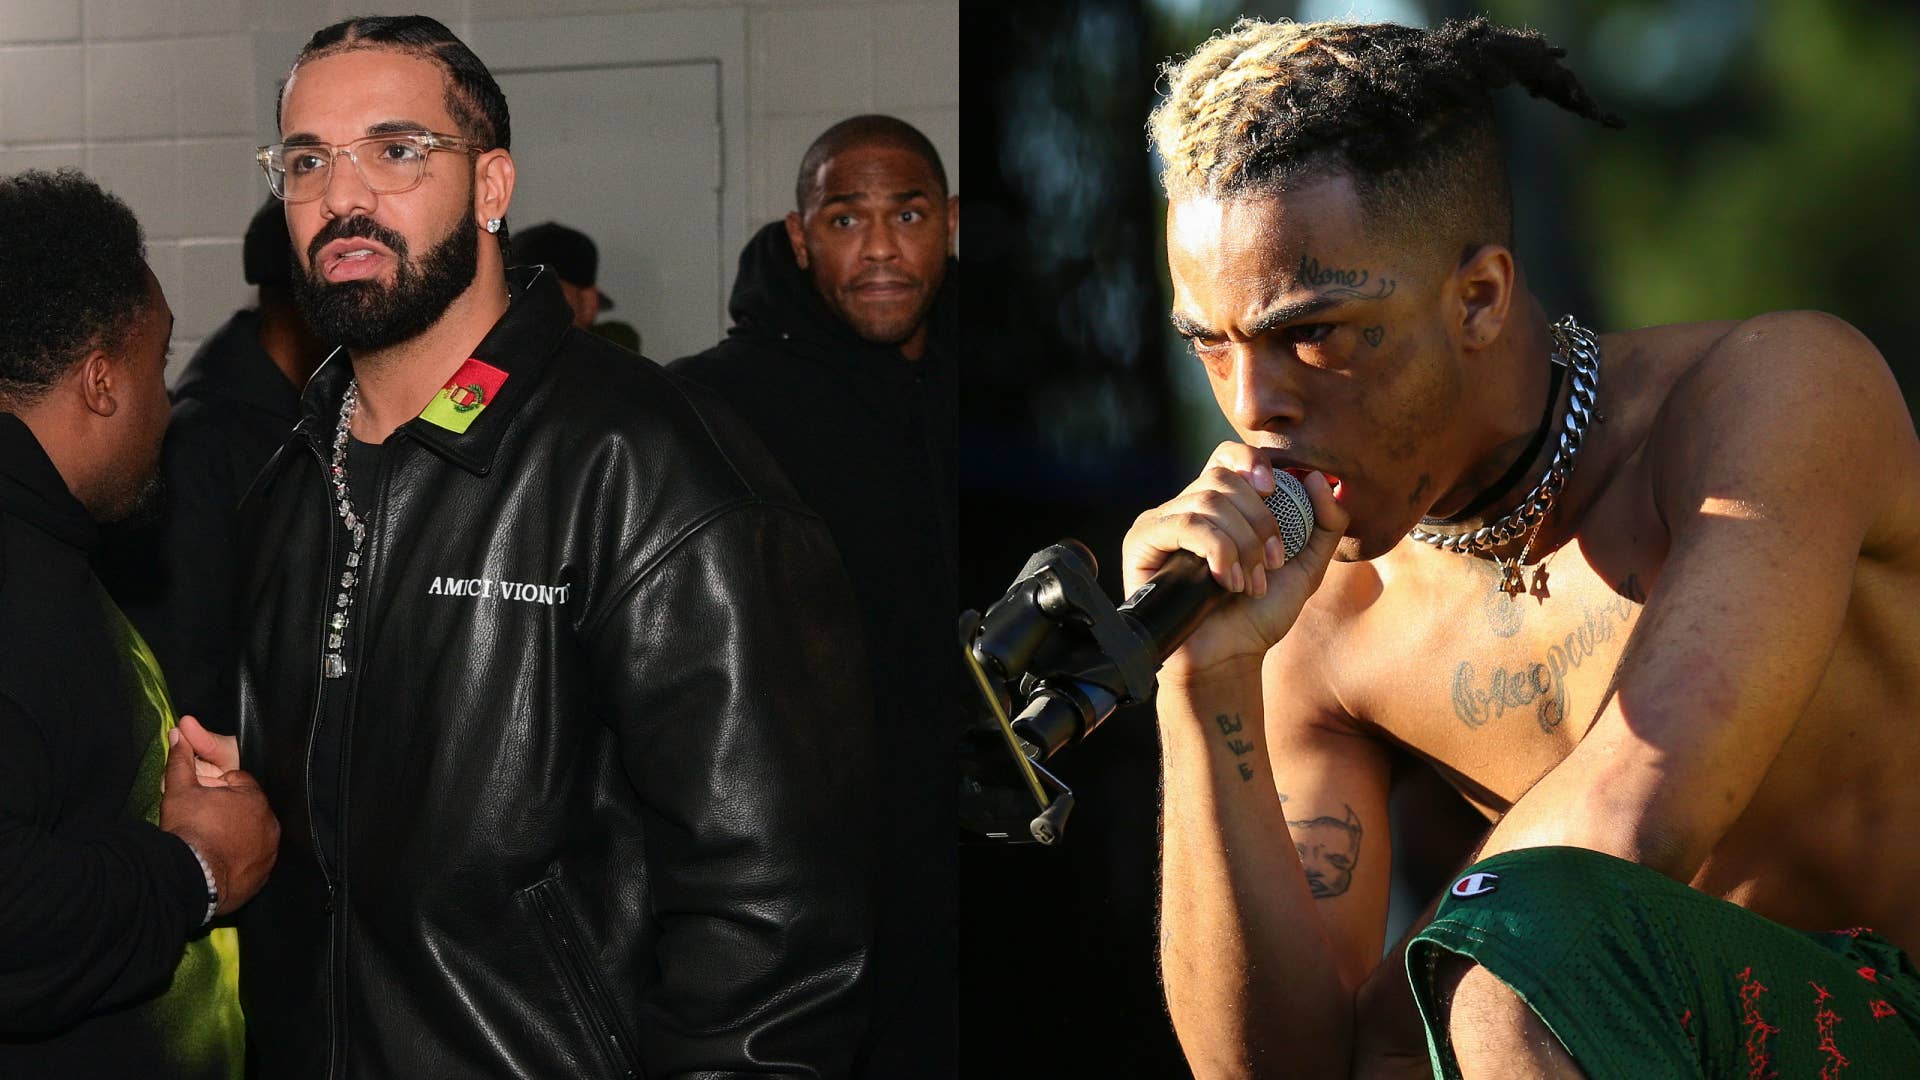 Drake and XXXTentacion are pictured in separate pics